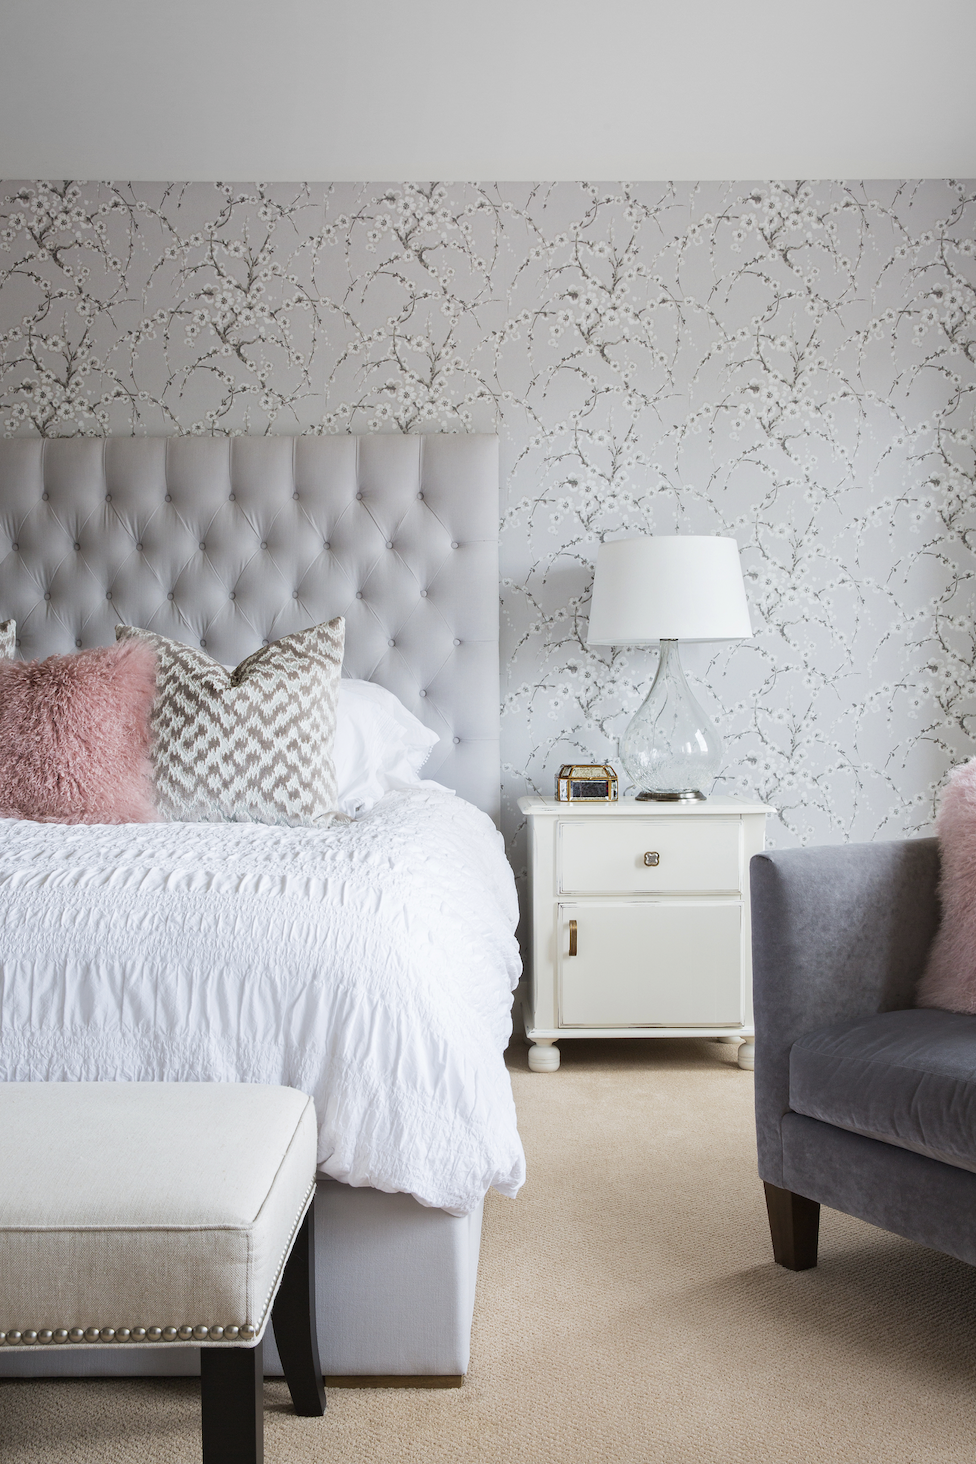 gray and coral bedroom accent wall colors